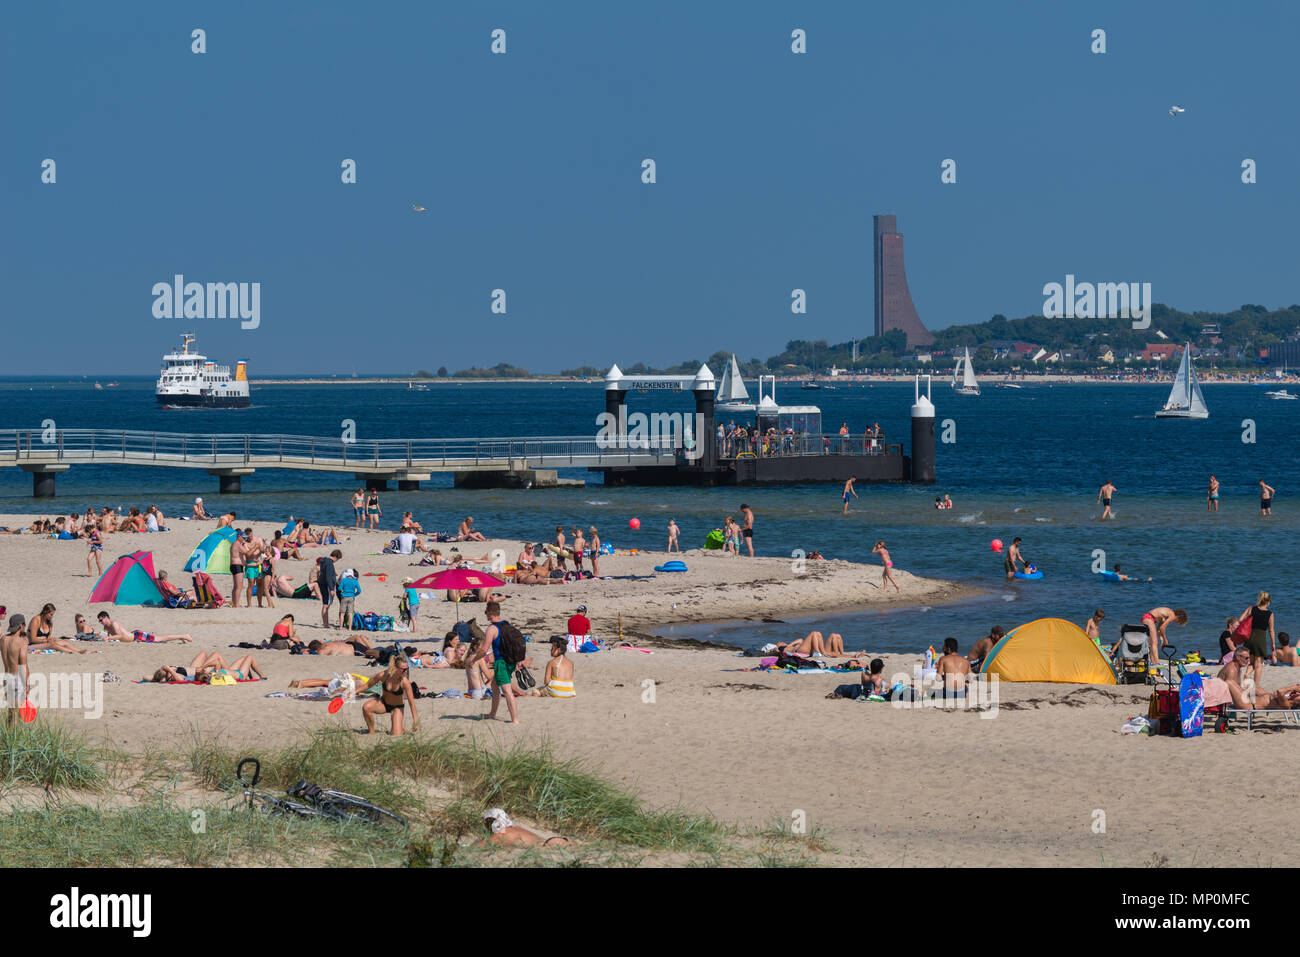 Relaxing at a hot summer day at the beach 'Falkensteiner Strand', the fjord liner coming up to the pier, Kiel Fjord, Kiel, Germany, Stock Photo